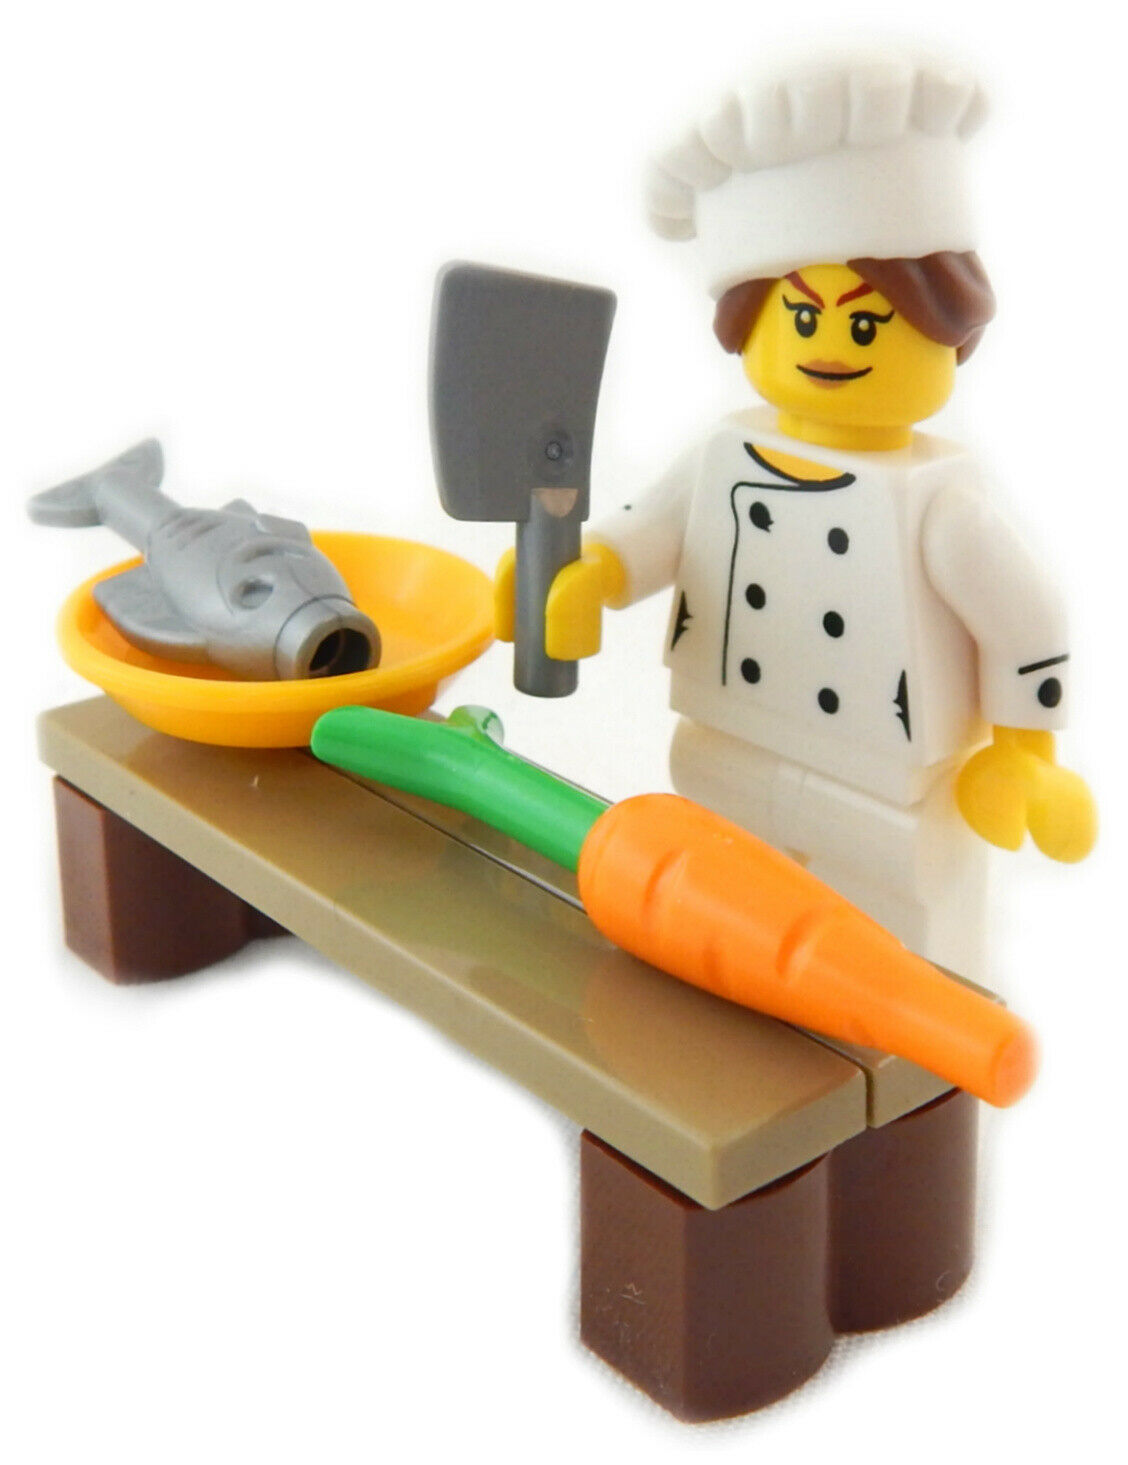 LEGO NEW COOK CHEF MINIFIGURE WITH FISH AND MINIFIG FOOD PIECES